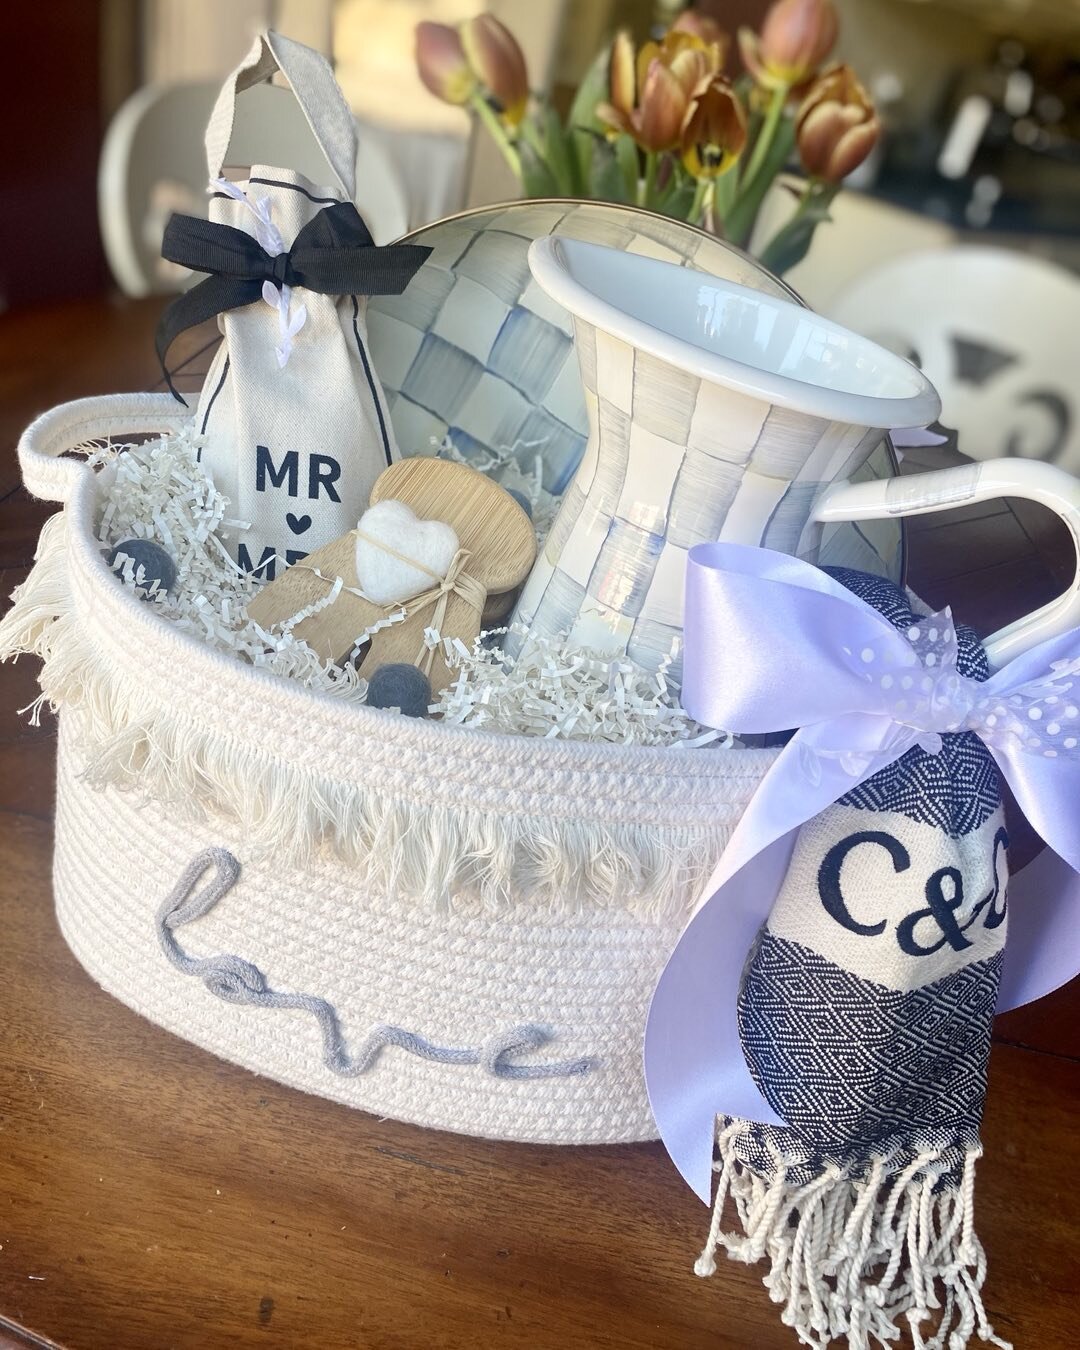 A very special wedding gift featuring beautiful new MacKenzie-Childs pattern pieces from @CorneliaParkaz 
.
.
.
#customweddinggifts #customgifts #personalizedgifts #weddinggifts #shopazlocal #giftboxes